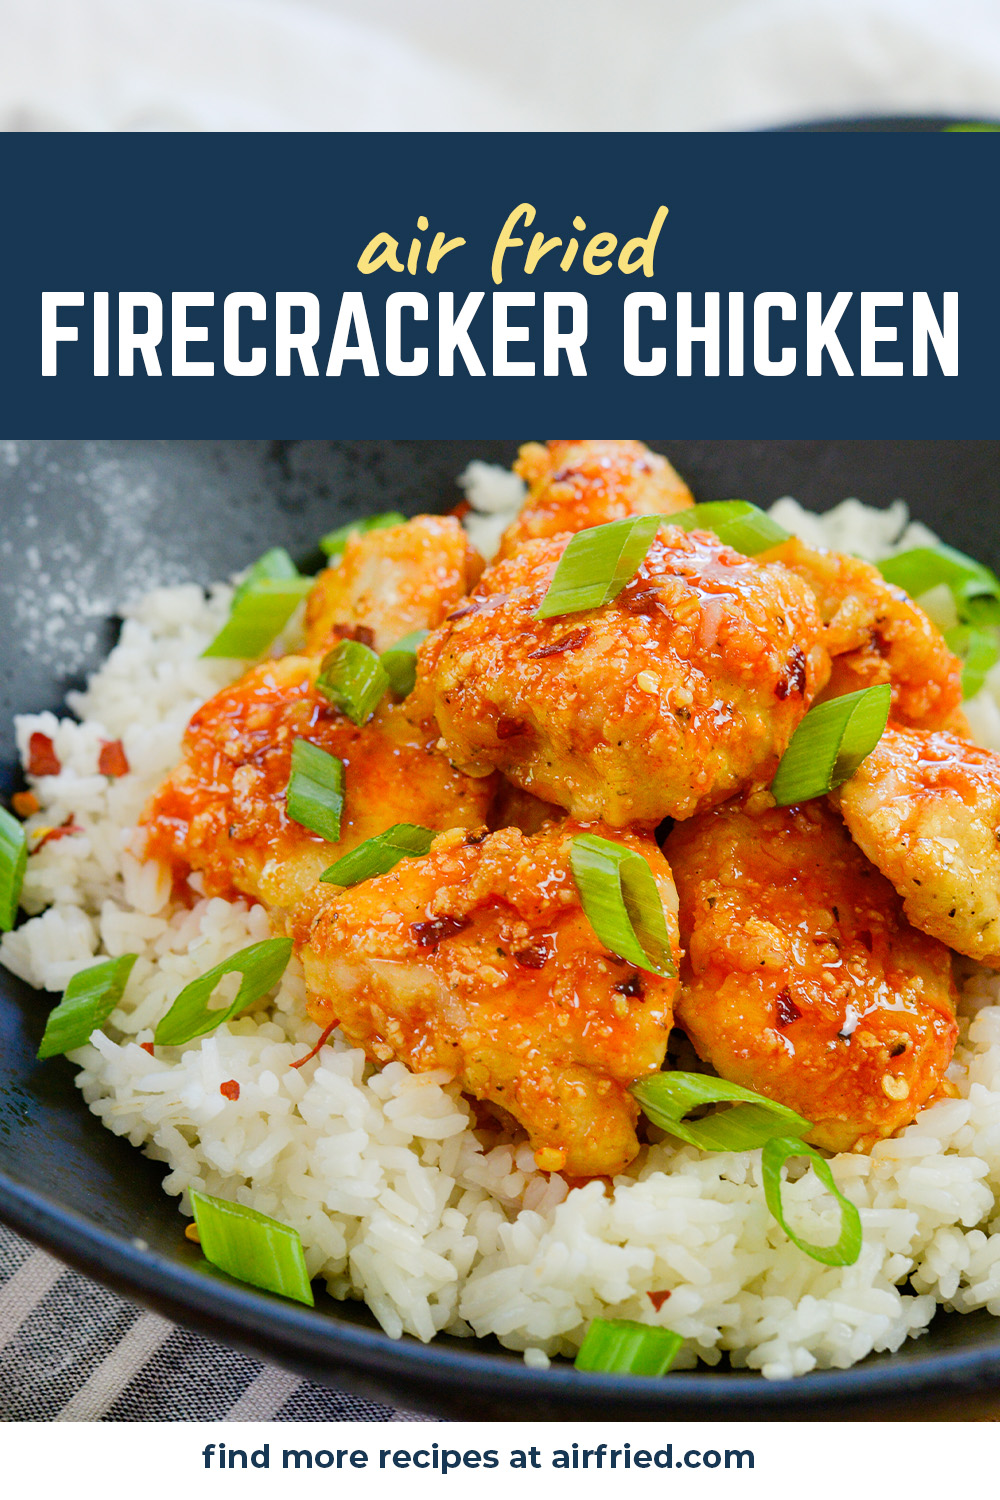 This firecracker chicken recipe cooks the chicken in an air fryer to a crisp finish and then we coat it in a sweet and spicy sauce!